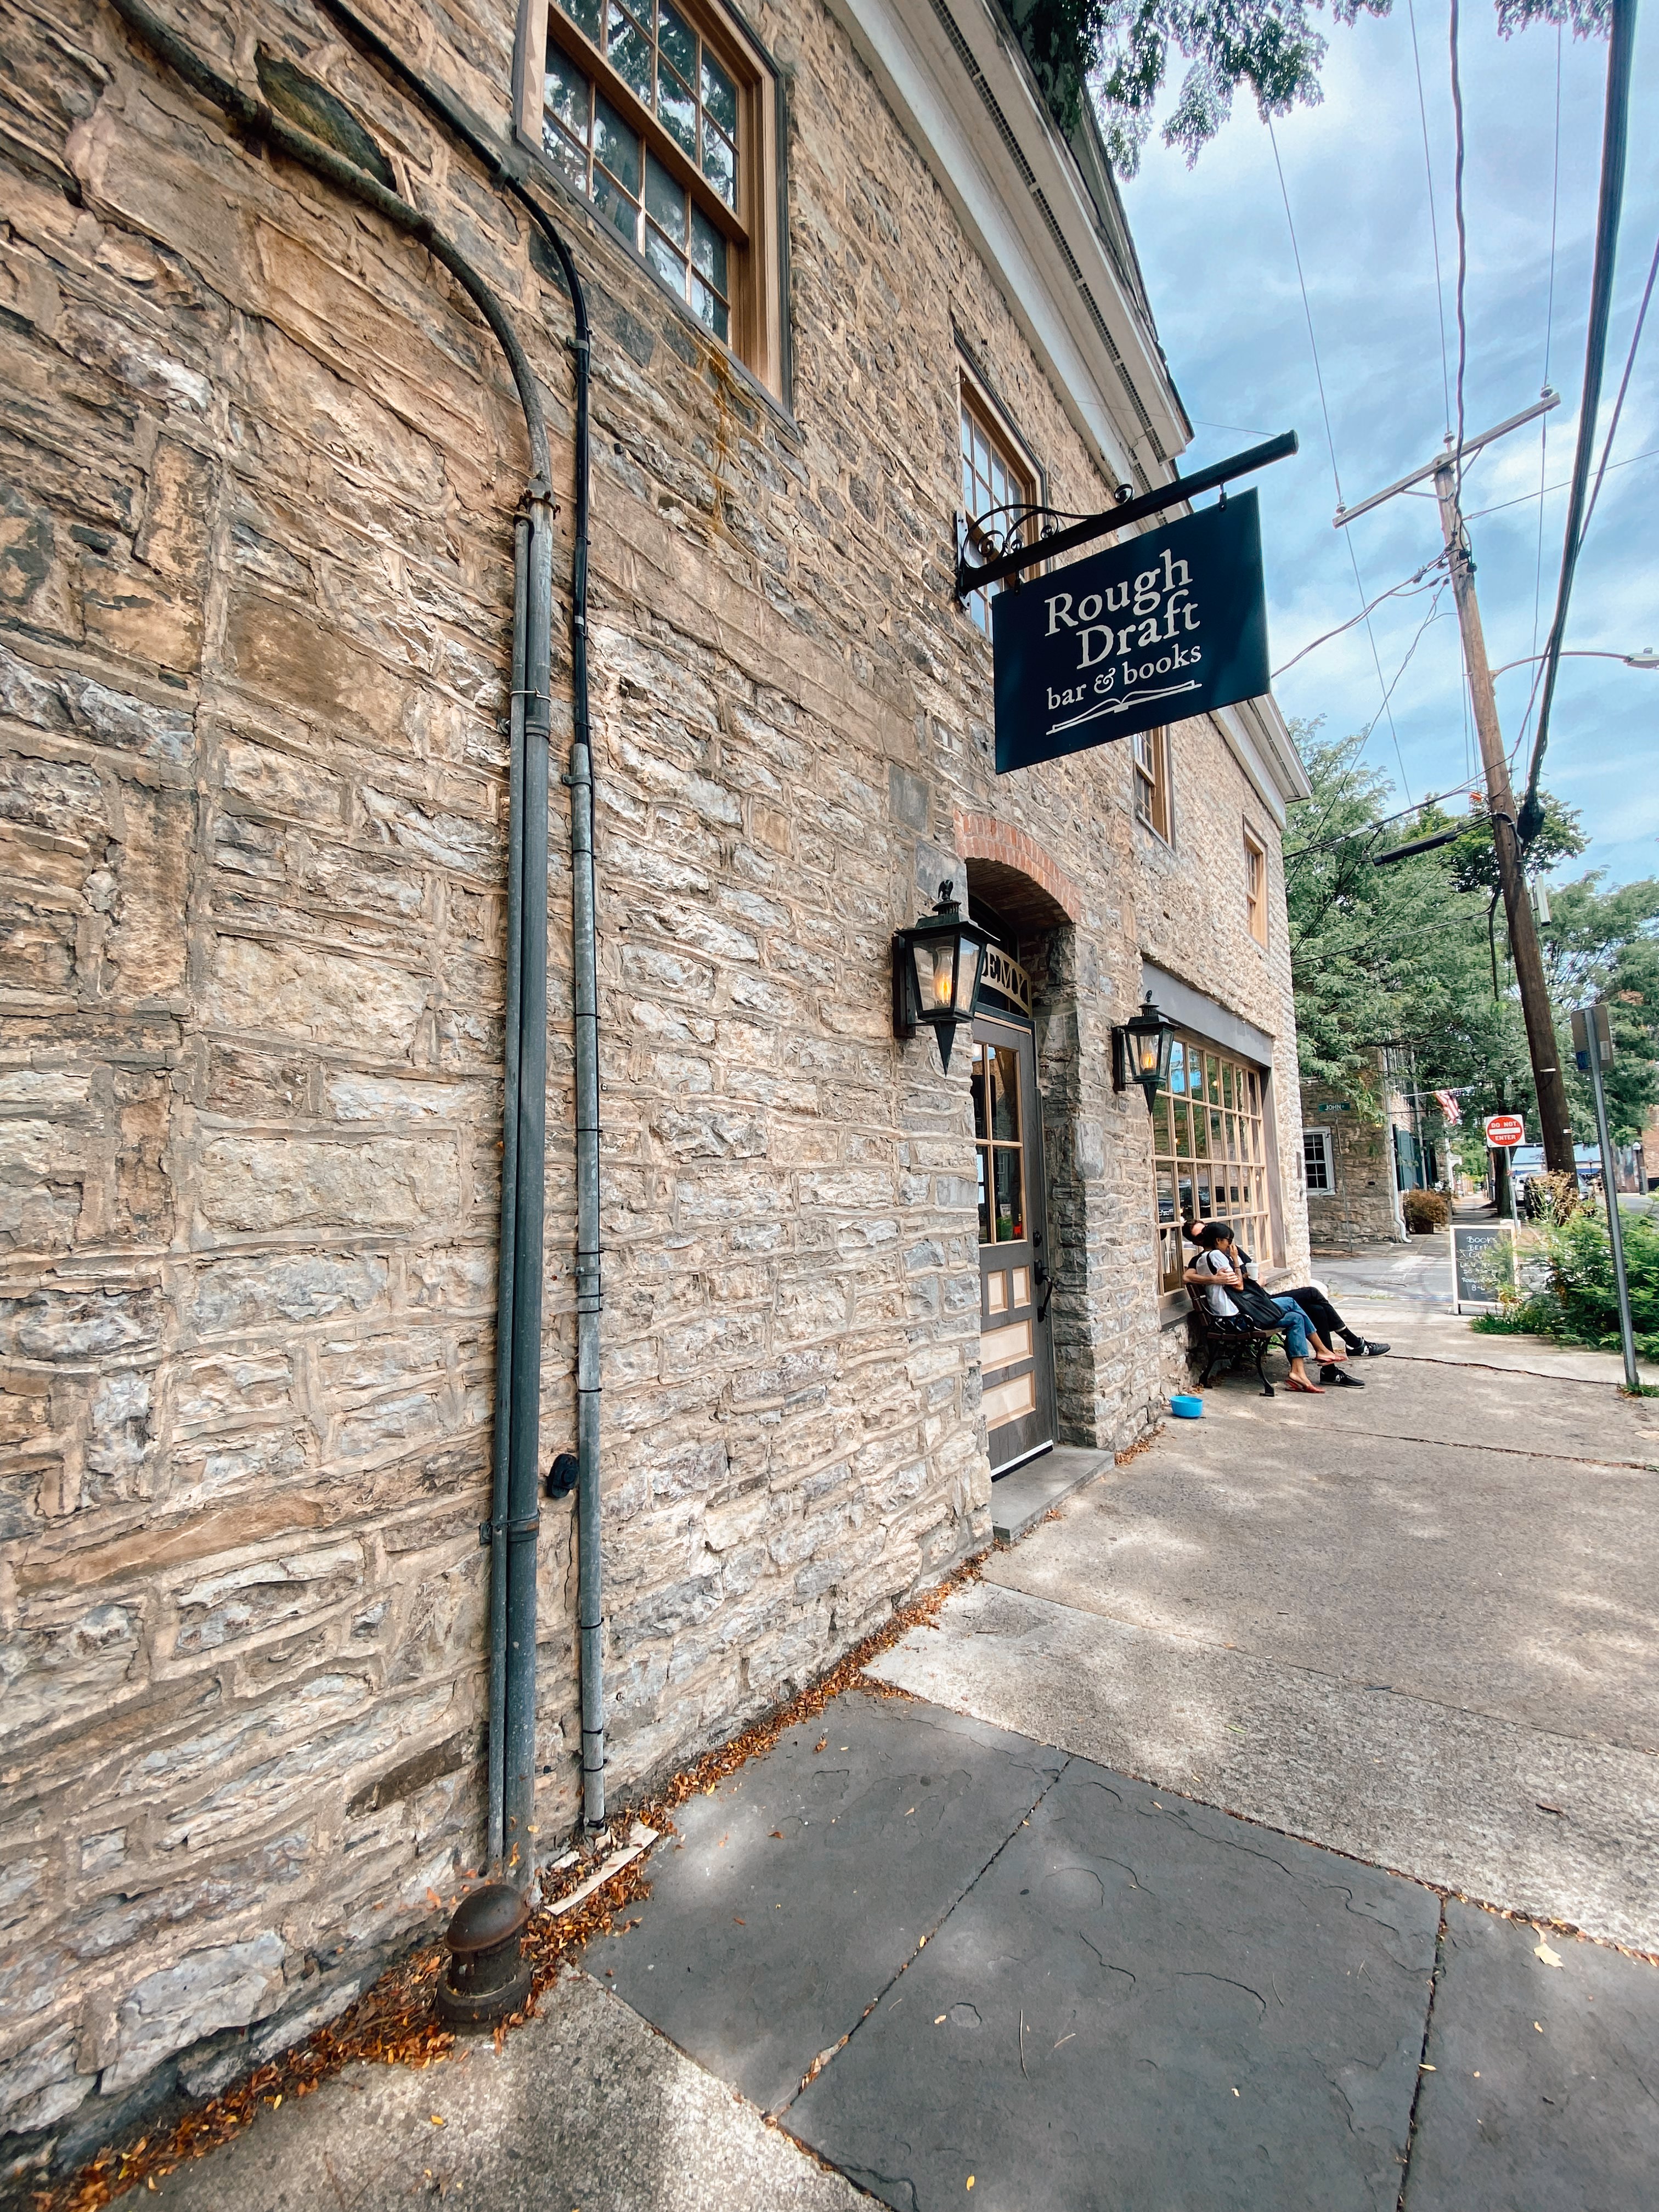 The beige stone exterior of Rough Draft books, one of the best things to do in Kingston, NY